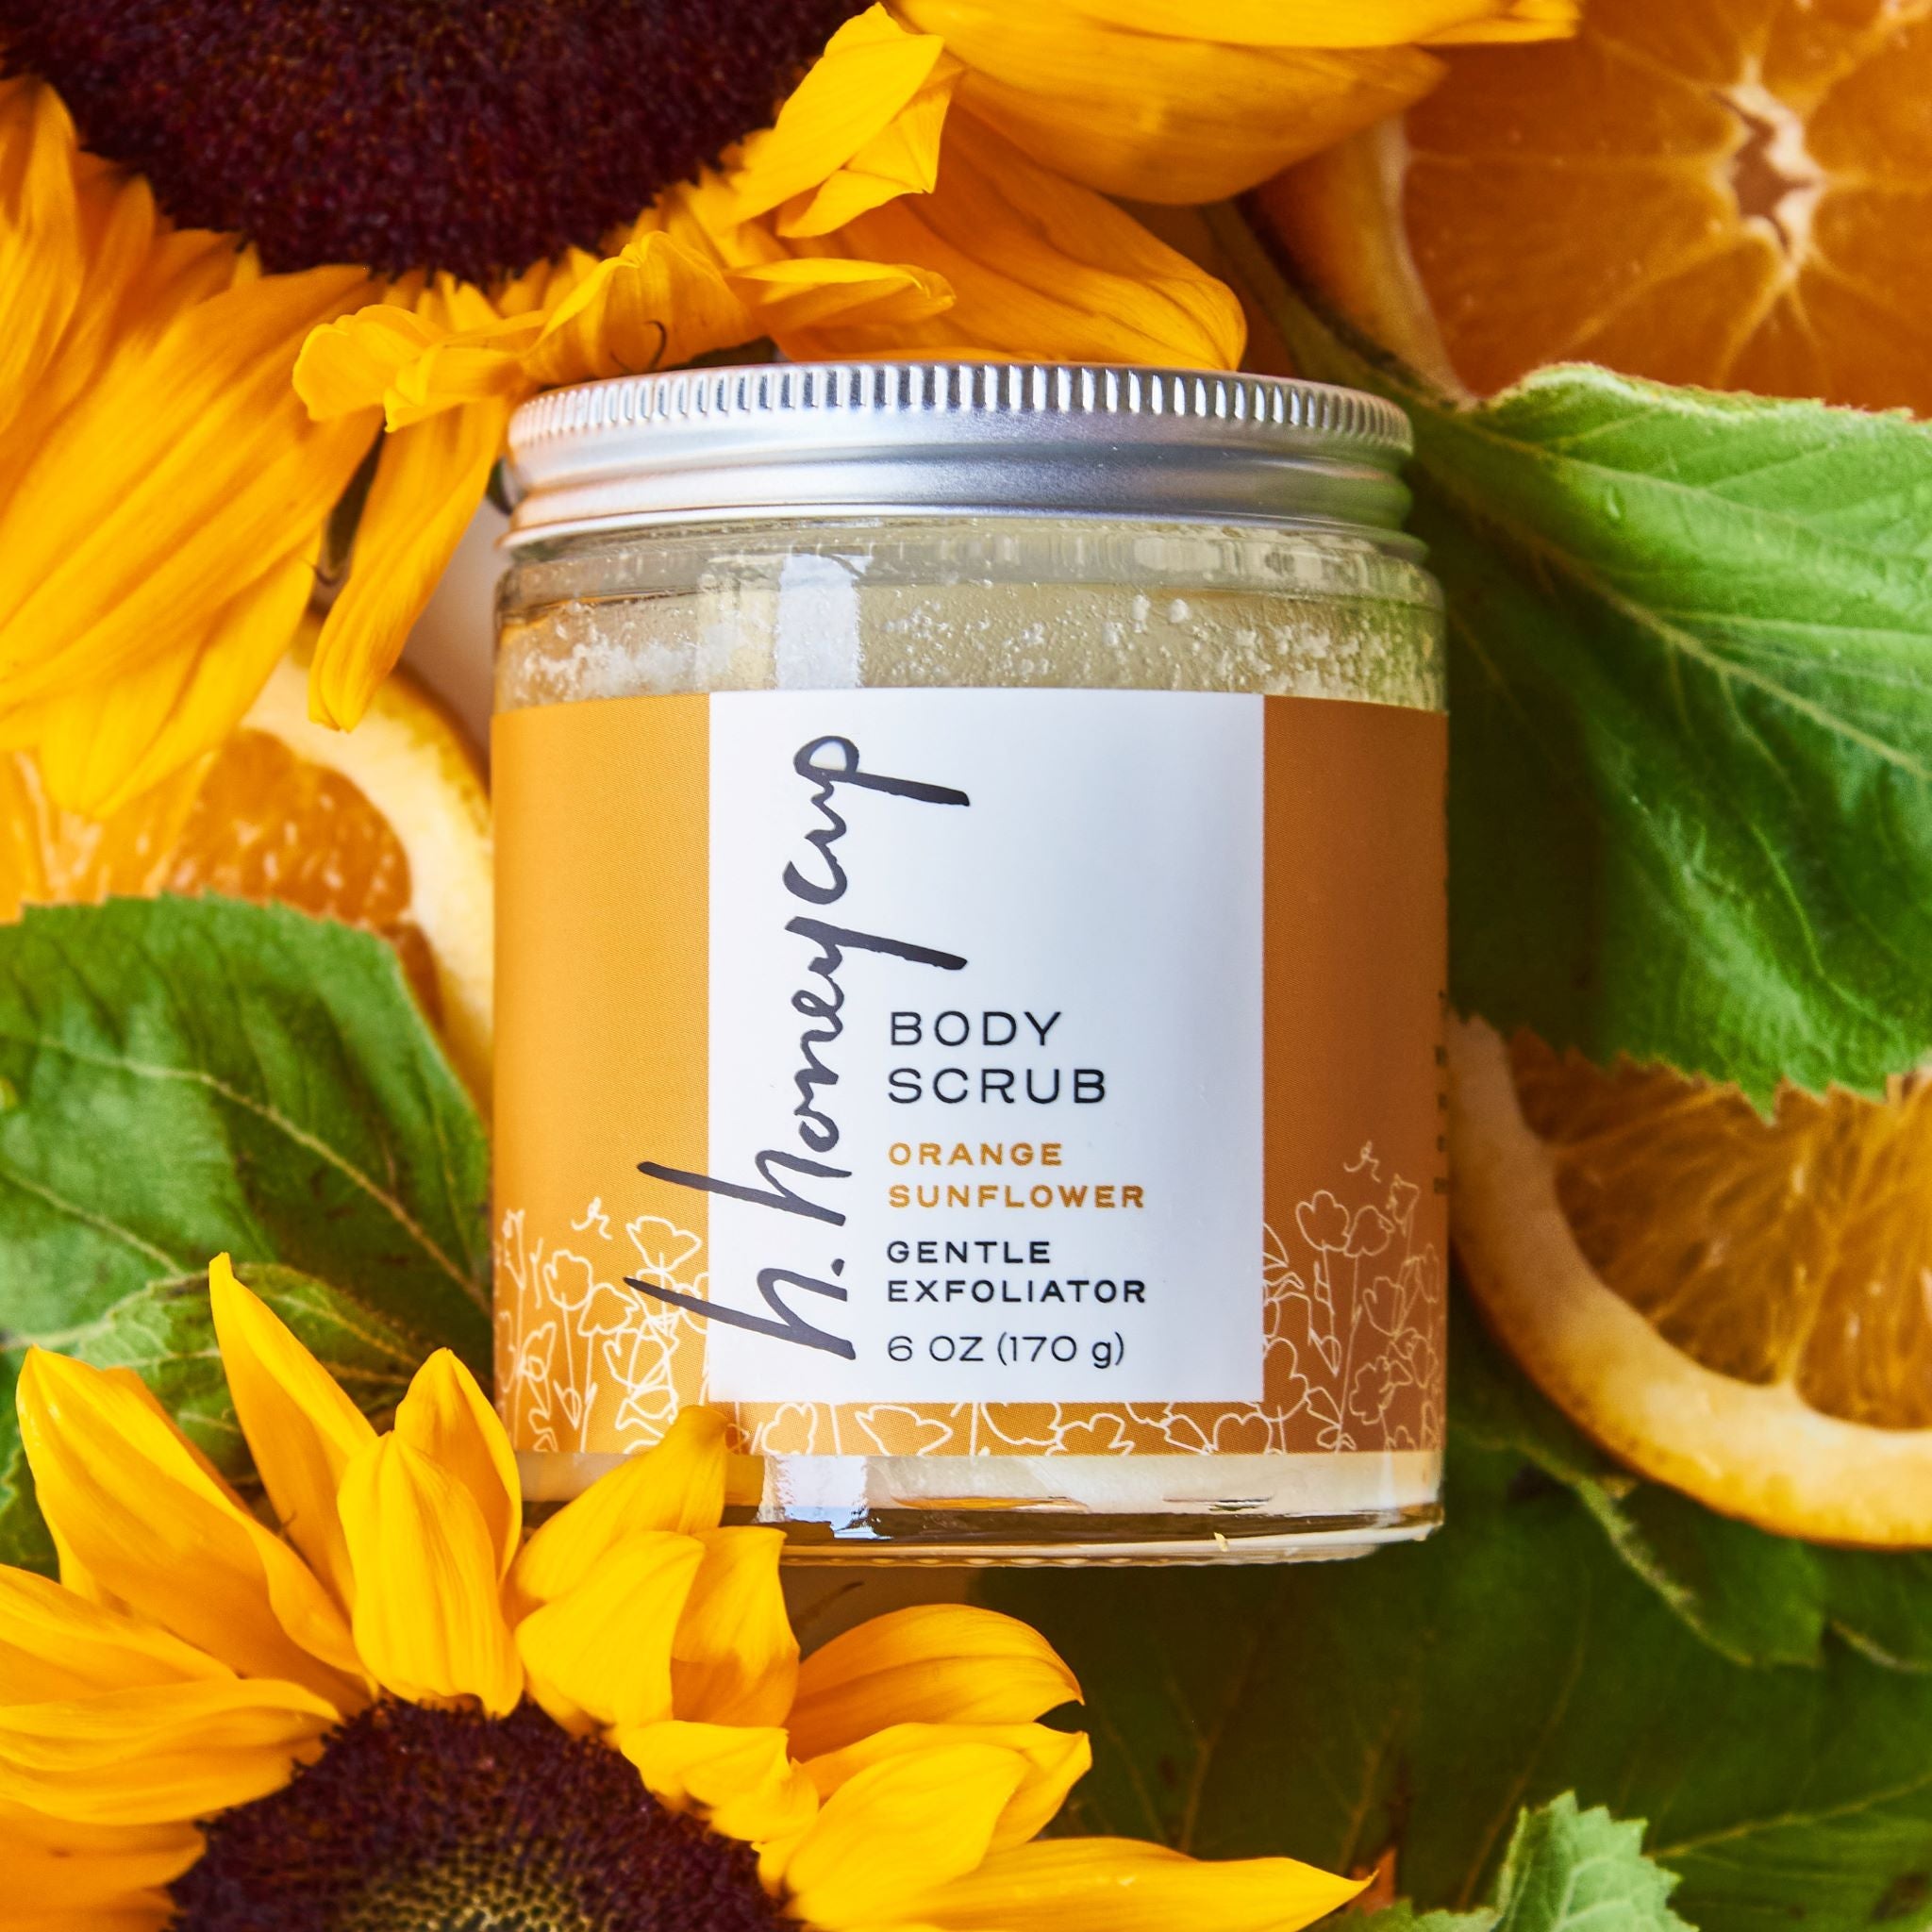 sugar scrub2 with oranges and sunflowers